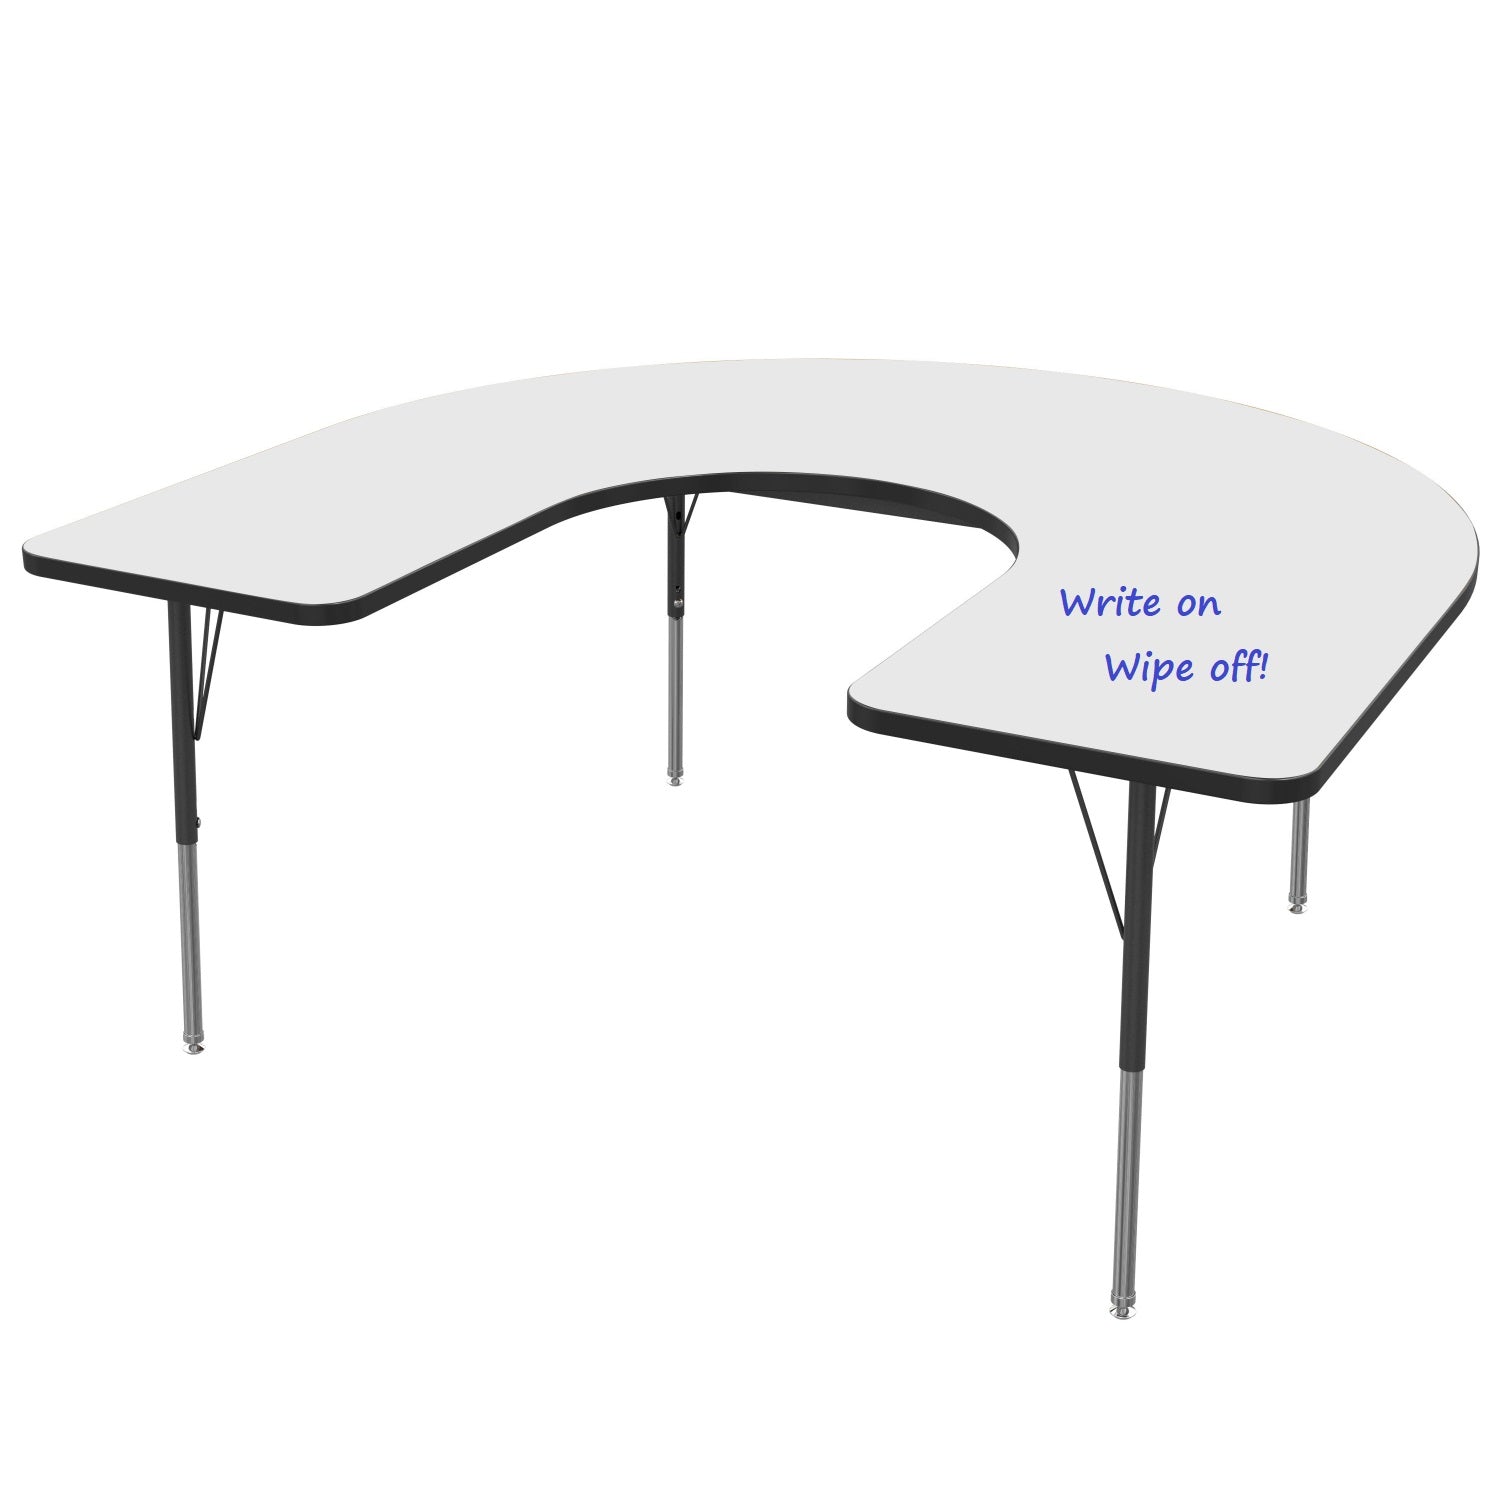 MG Series Adjustable Height Activity Table with White Dry Erase Marker -  NextGen Furniture, Inc.